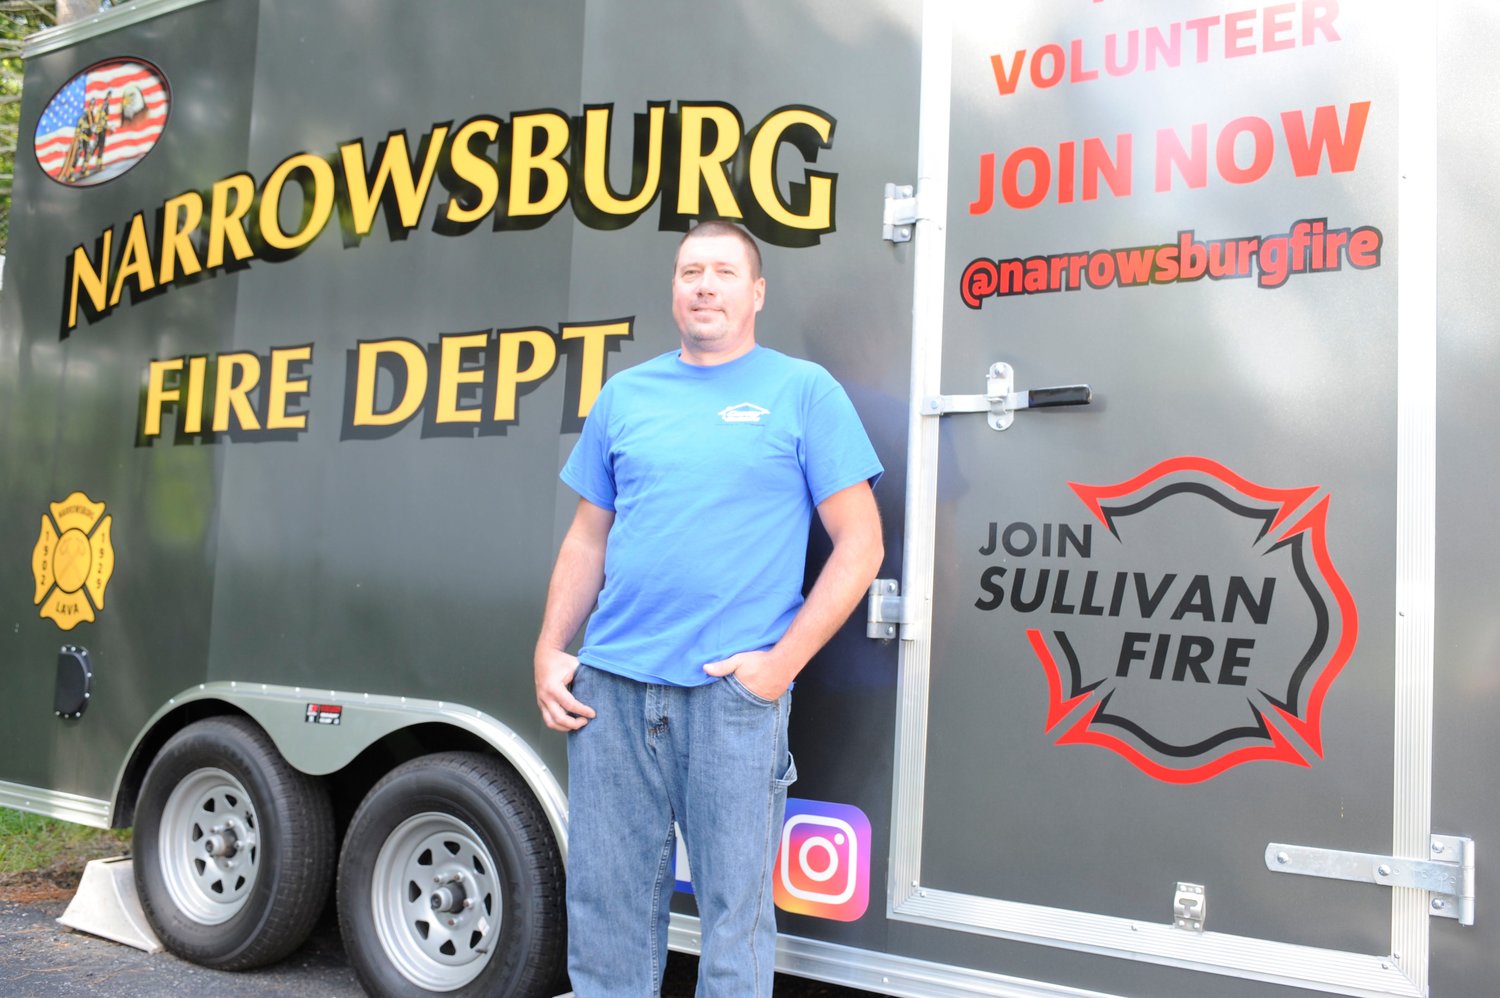 David Casey, chief of the Narrowsburg Fire Department, stands by the department’s enclosed trailer, near a reminder of the Join Sullivan Fire message.